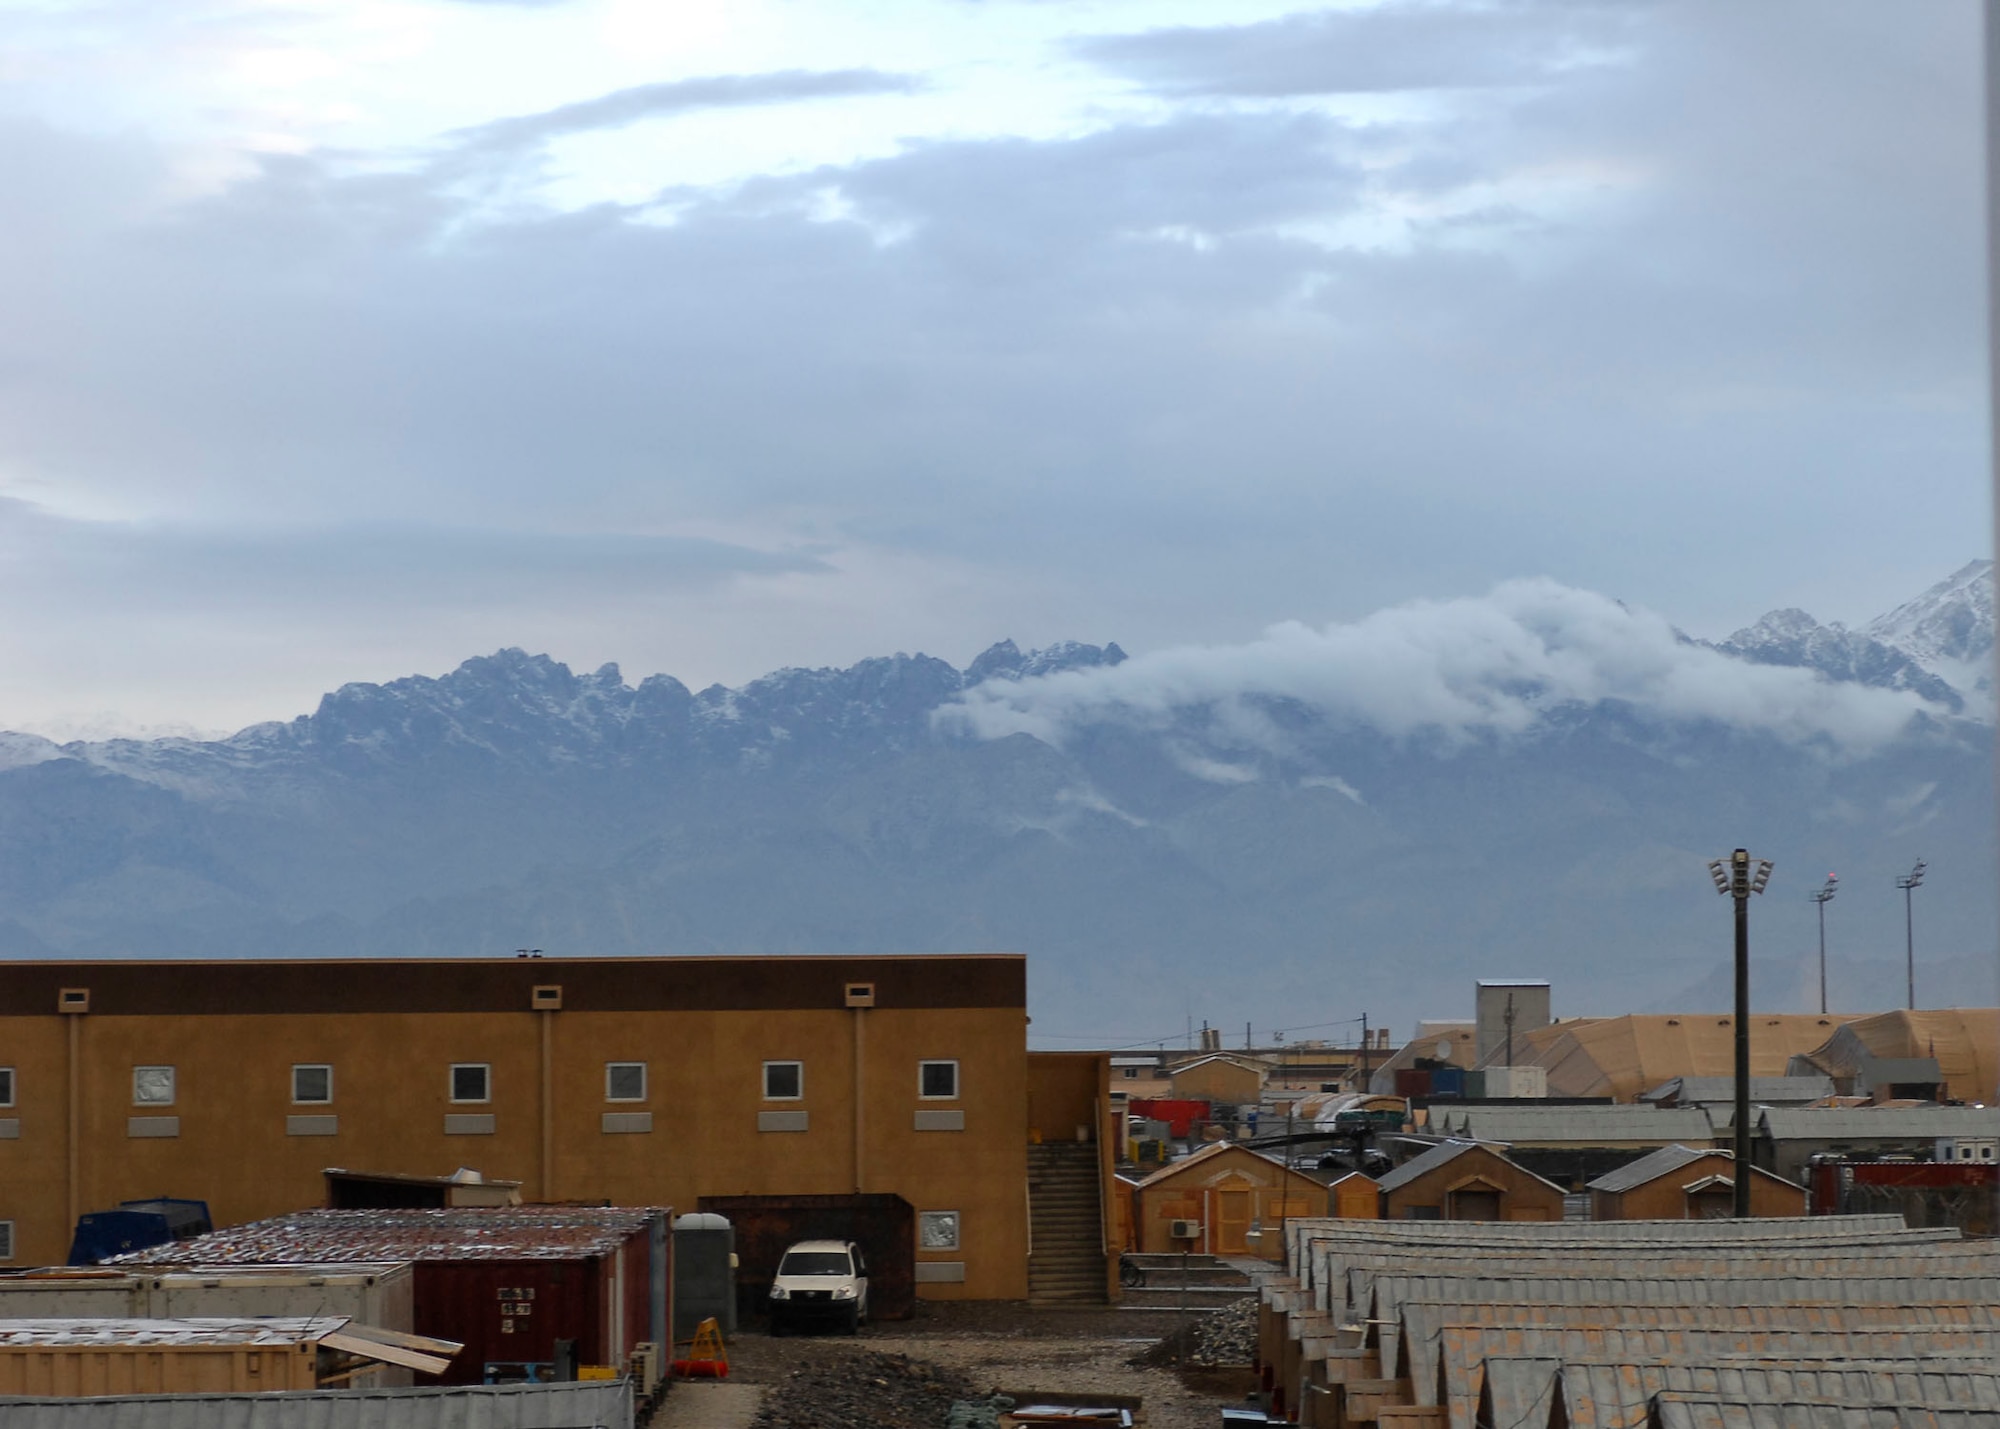 BAGRAM AIRFIELD, Afghanistan -- Mountains in Afghanistan are barely visible in the morning haze Nov. 9, 2009.  The high altitude of the Hindu Kush mountain range creates a harsh climate ranging from more than 100 degrees Fahrenheit in the summer to below-freezing temperatures in the winter.  (U.S. Air Force photo/Senior Airman Felicia Juenke)